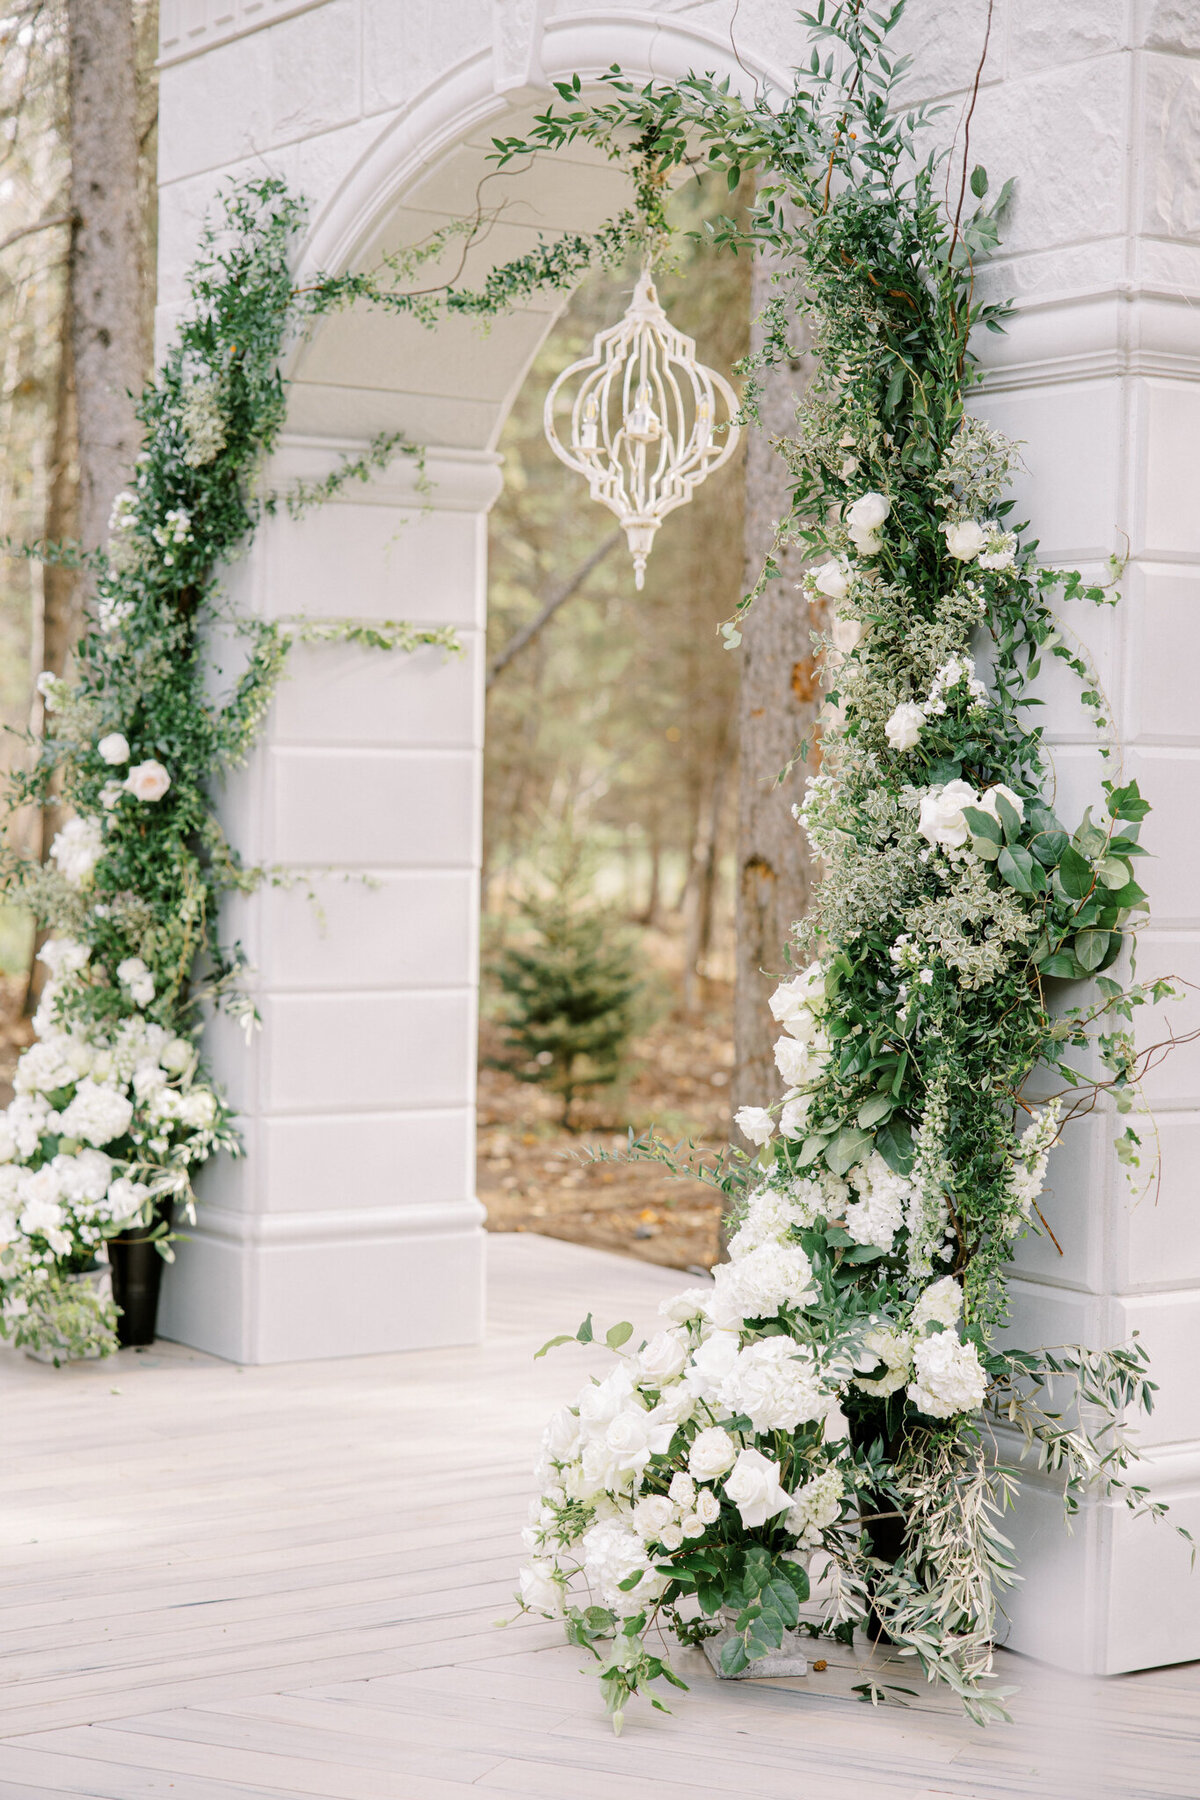 Ceremony arch at Archway Manor Weddings & Events, elegant, timeless, European-inspired Red Deer, Alberta wedding venue, featured on the Brontë Bride Vendor Guide.